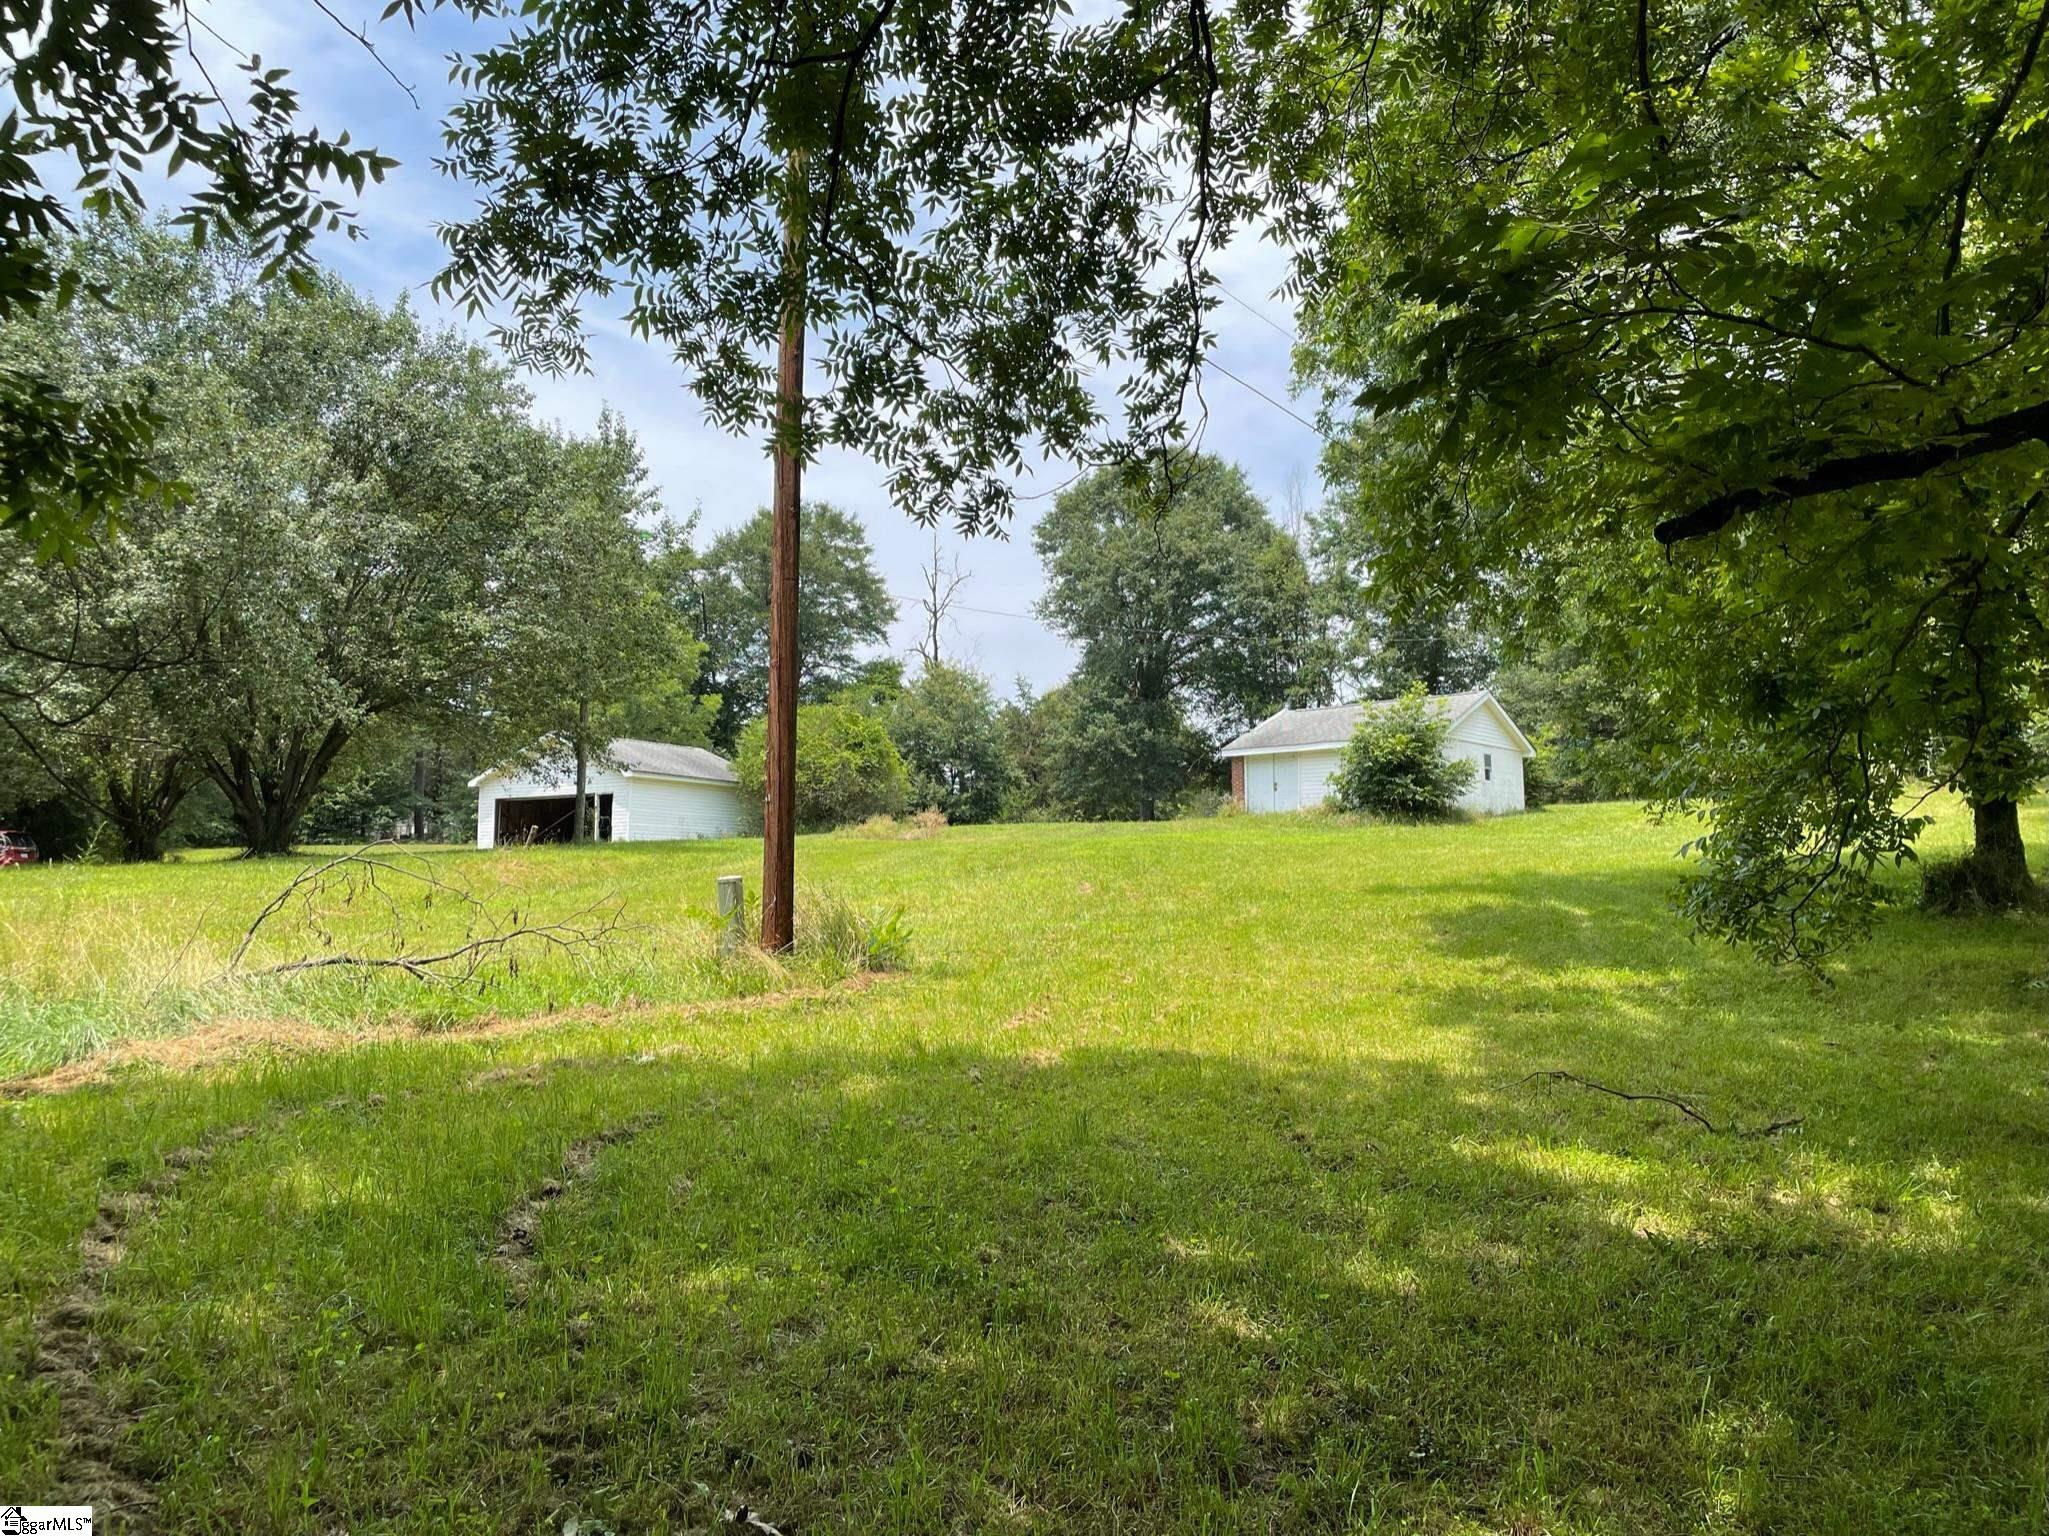 1.55 Acres with utilities, garage, outbuilding, beautiful mature oaks and pecan trees is ready for you to build your dream home!  No known restrictions, so tiny houses and mobile homes are welcome, as well!    A home once stood on this fabulous property, so all utilities are believed to be in place.  A covered well that the house was NOT utilizing is located near the back of the property.  Home was connected to Big Creek Water.  Located in a quiet area in the desirable Anderson School District One.  Come see 340 Old River Road today and start making your building dreams come true!  APPOINTMENT REQUIRED. PLEASE DO NOT WALK LAND WITHOUT CONTACTING LISTING AGENT!